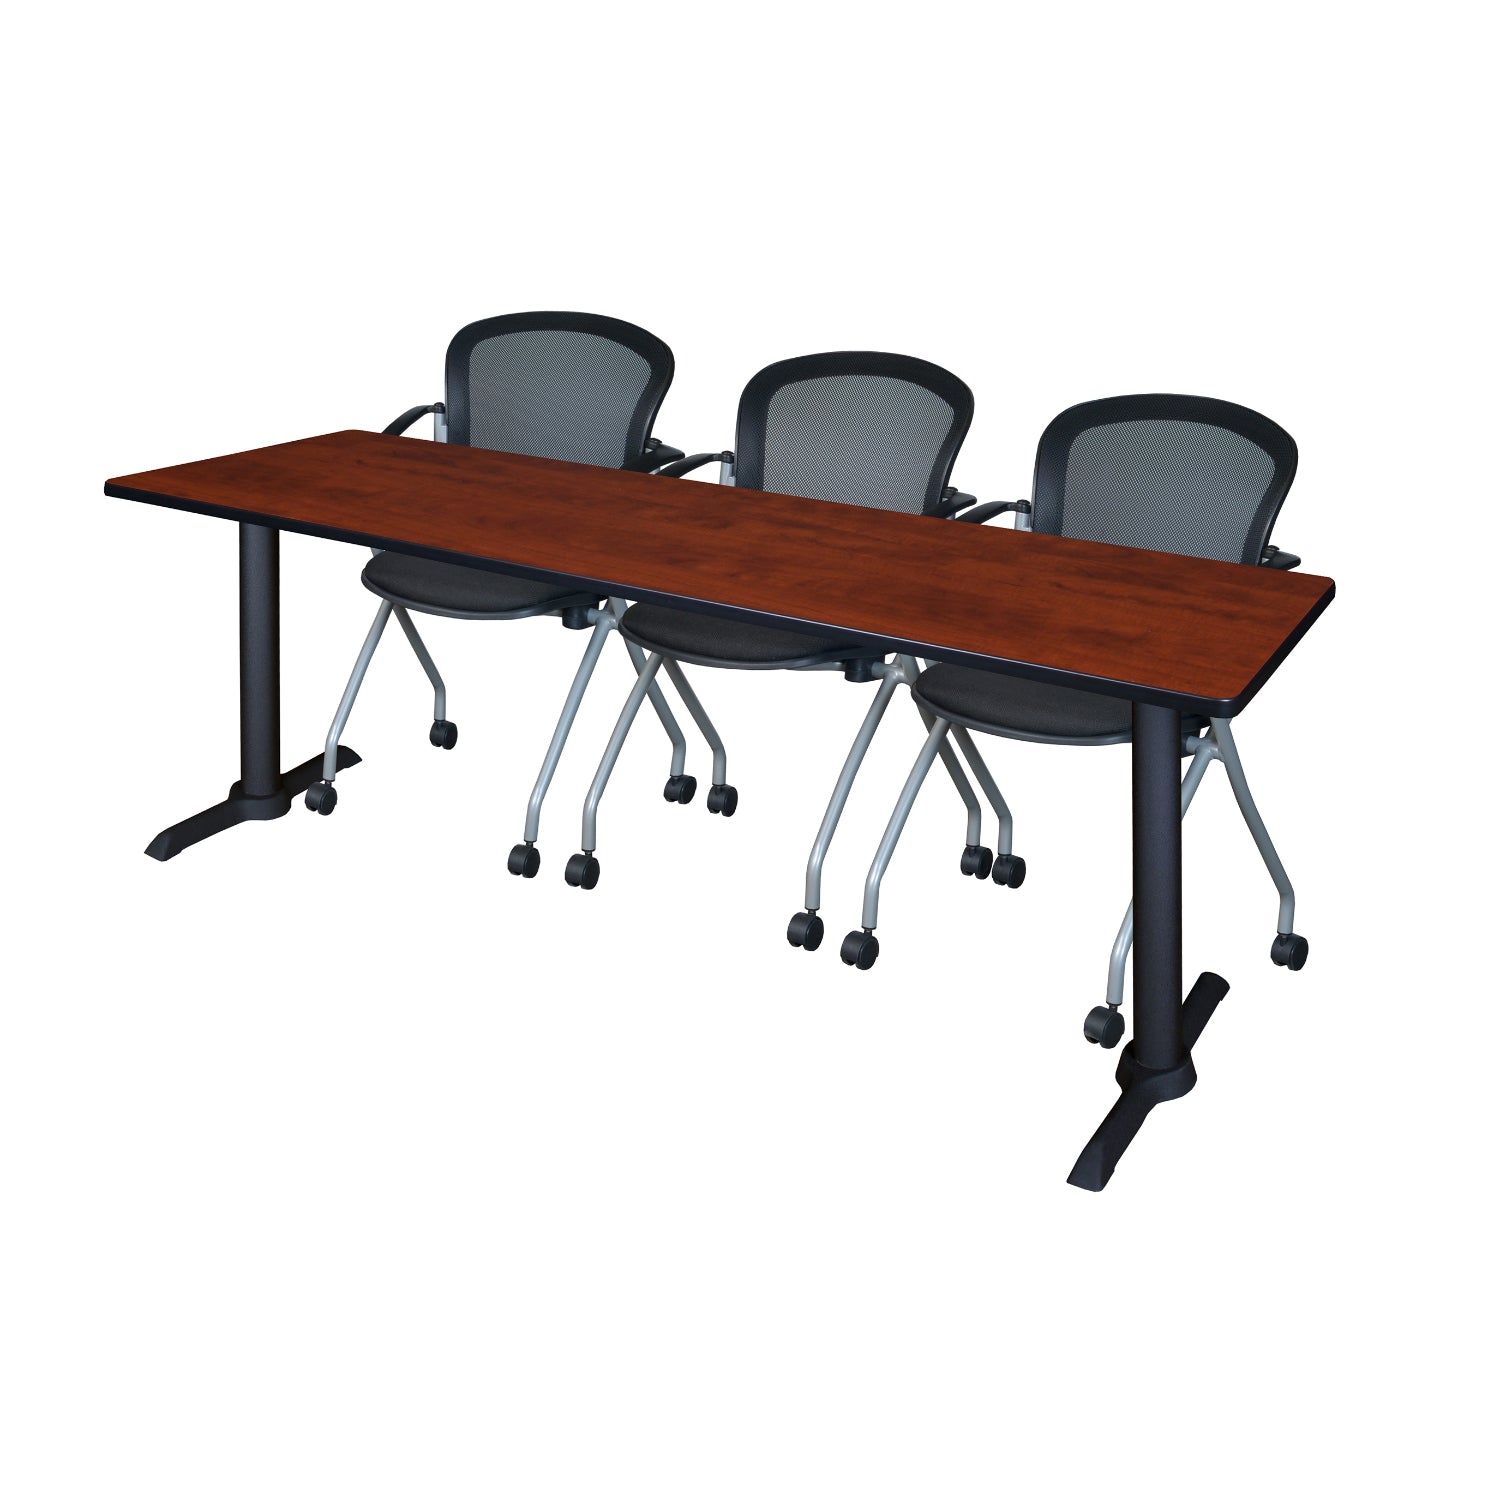 Cain Training Table and Chair Package, Cain 84" x 24" T-Base Training/Seminar Table with 3 Cadence Nesting Chairs